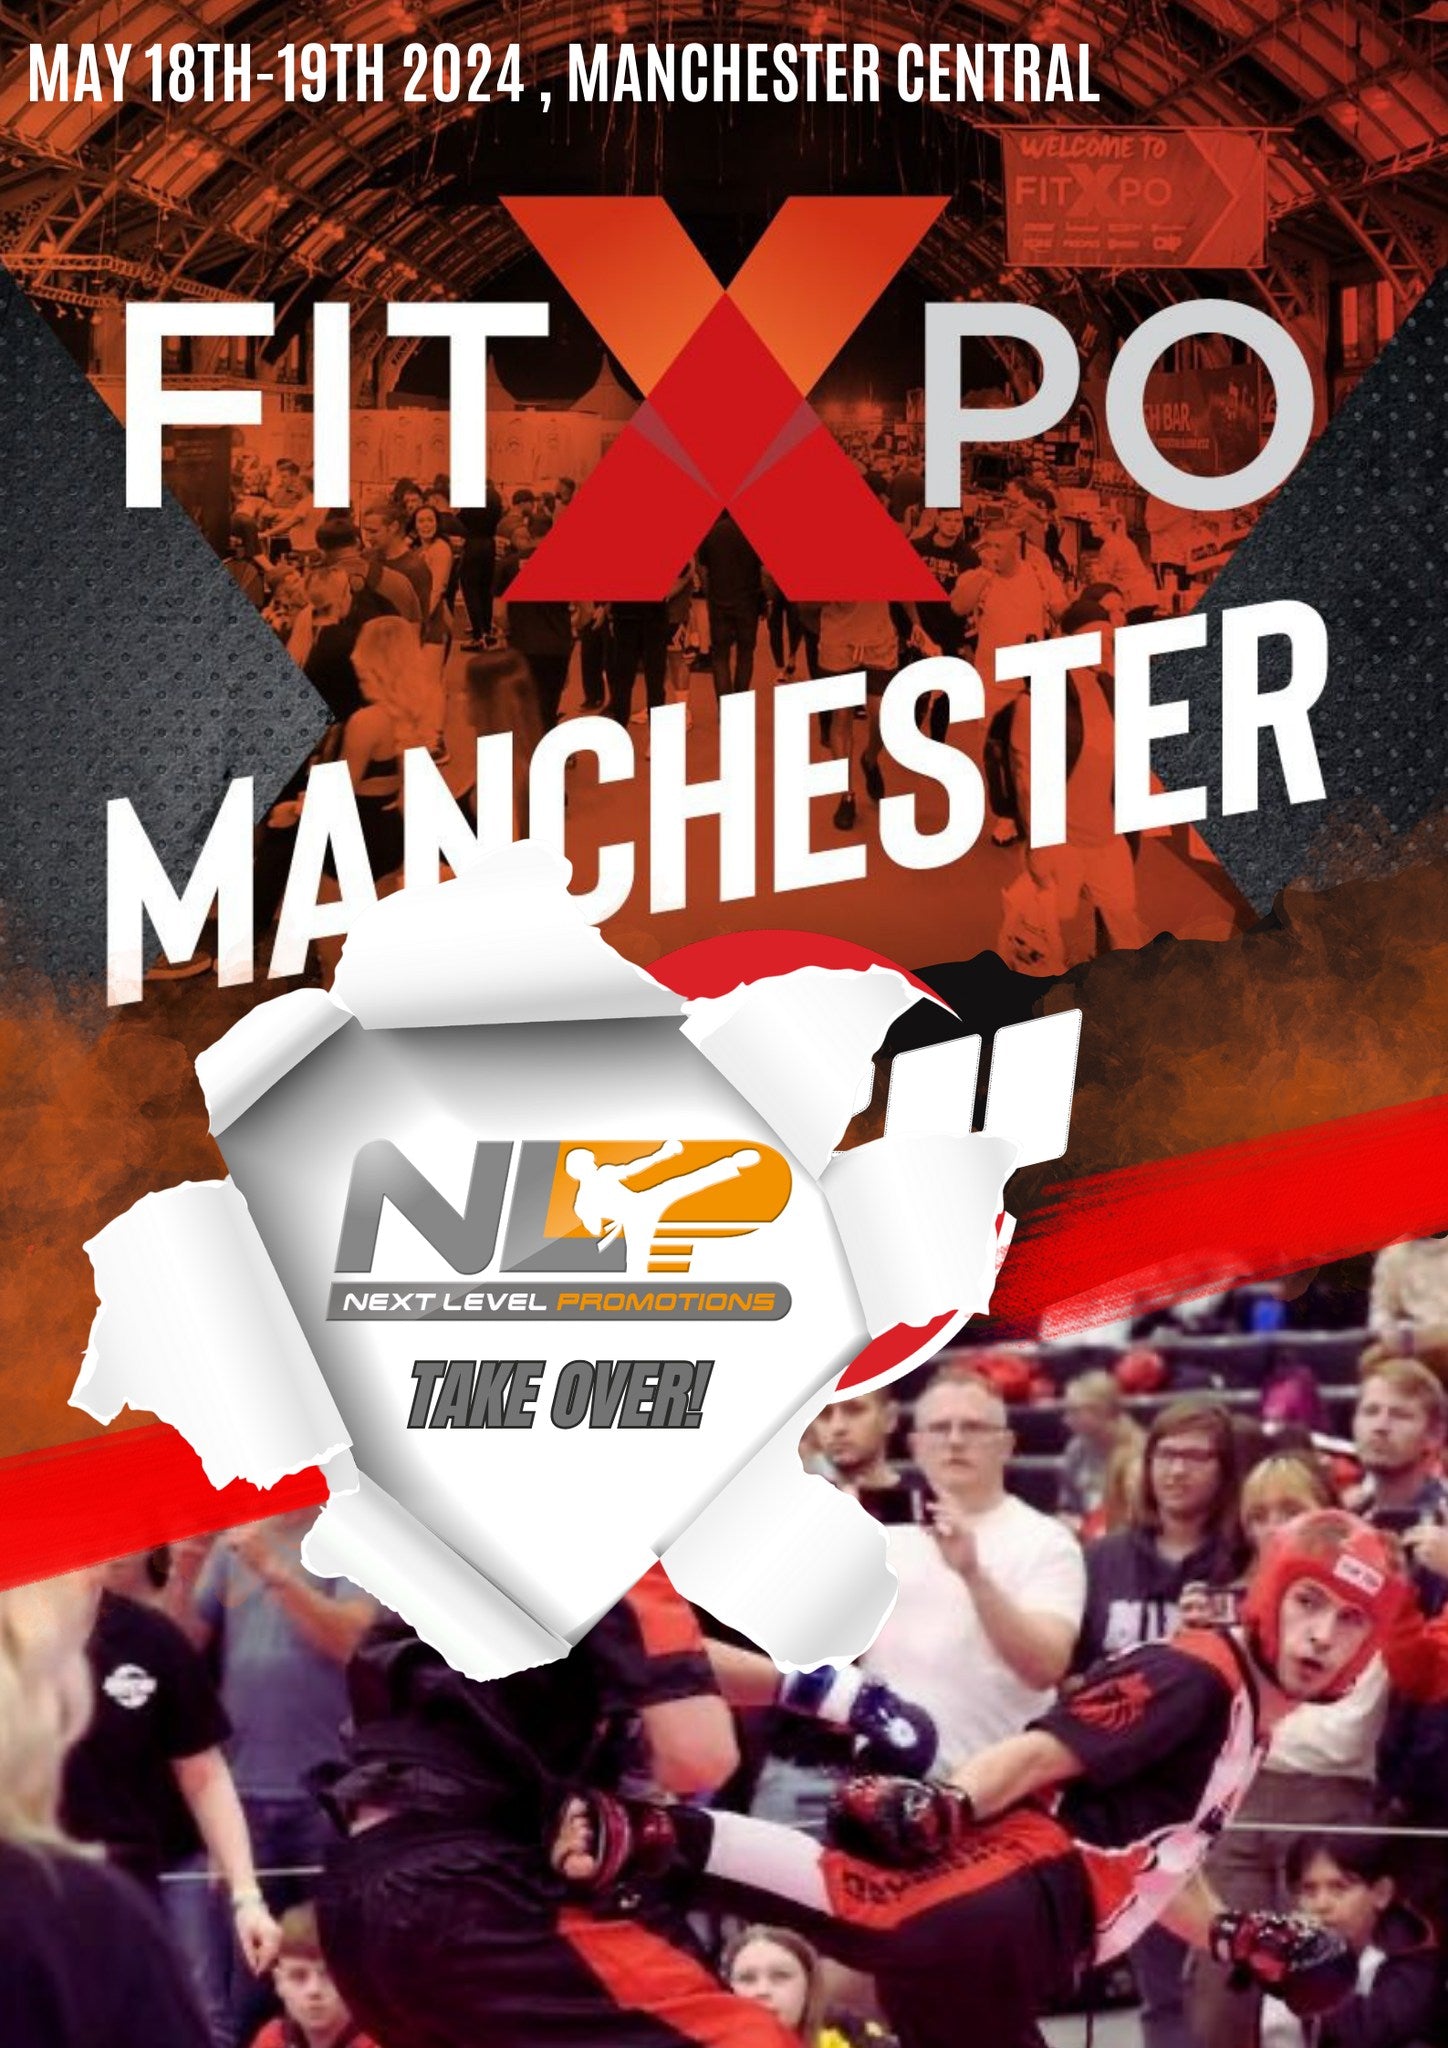 FIT XPO - Next Level Promotions - 18-19th May 2024